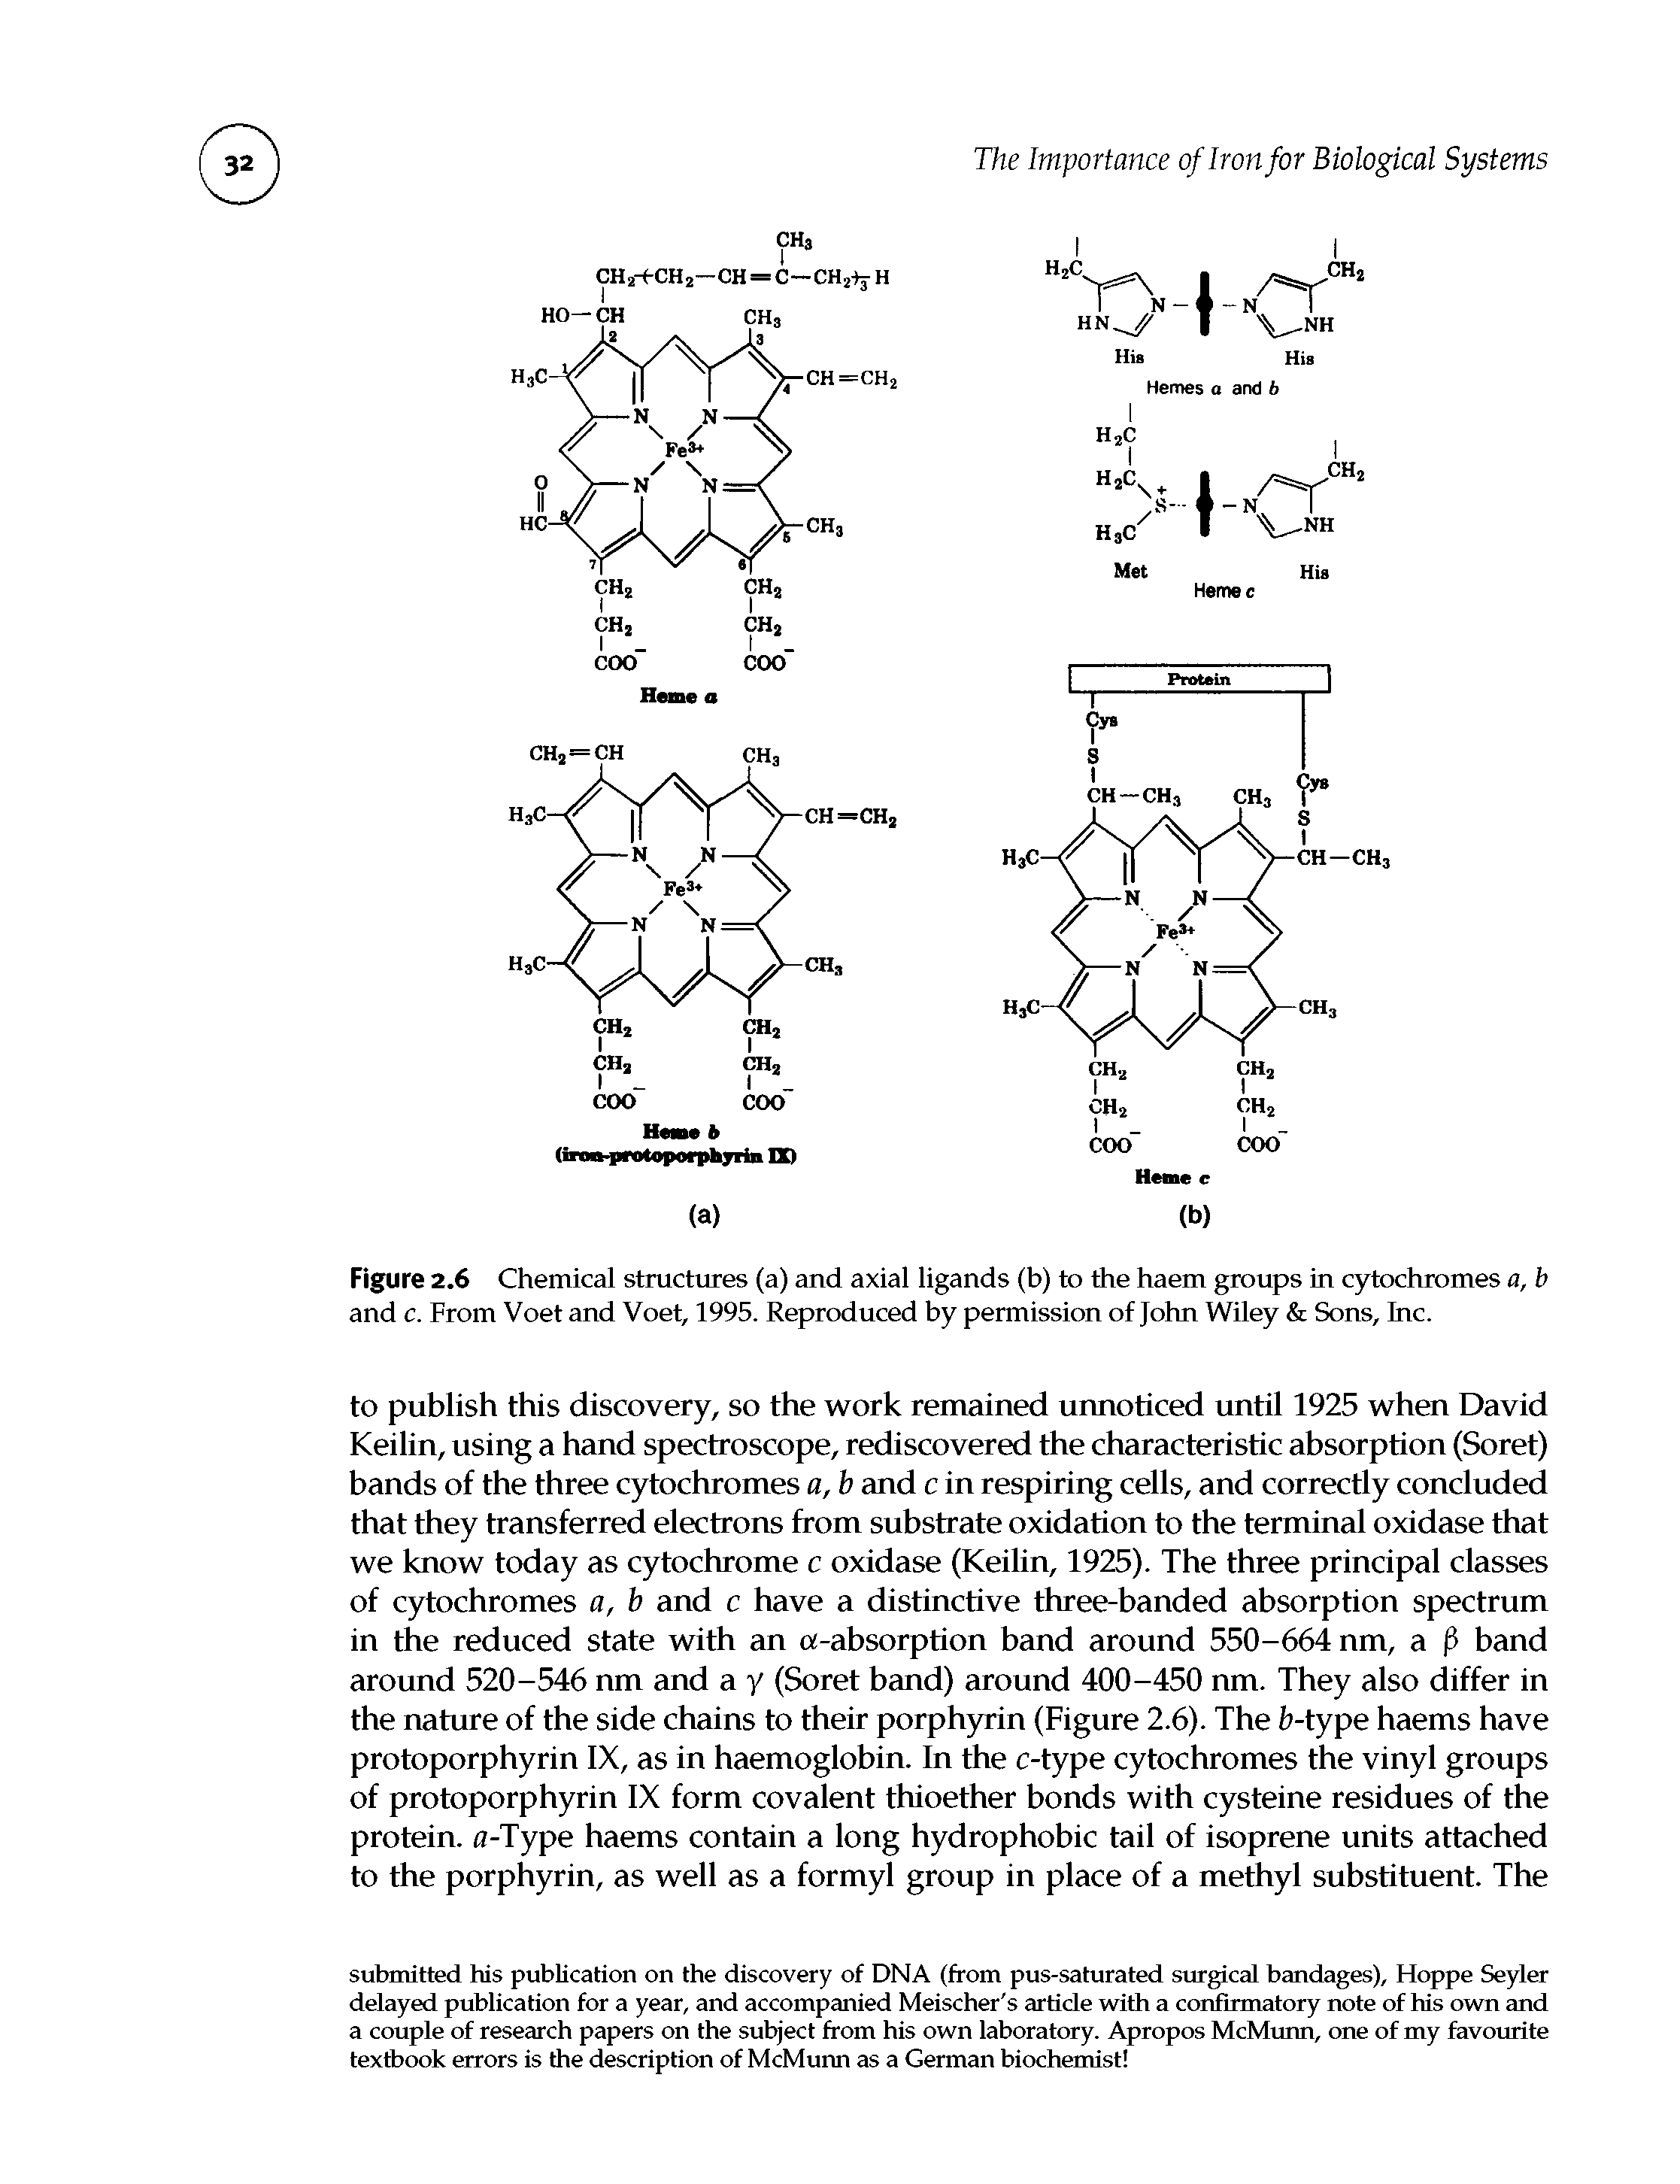 Figure 2.6 Chemical structures (a) and axial ligands (b) to the haem groups in cytochromes a, b and c. From Voet and Voet, 1995. Reproduced by permission of John Wiley Sons, Inc.